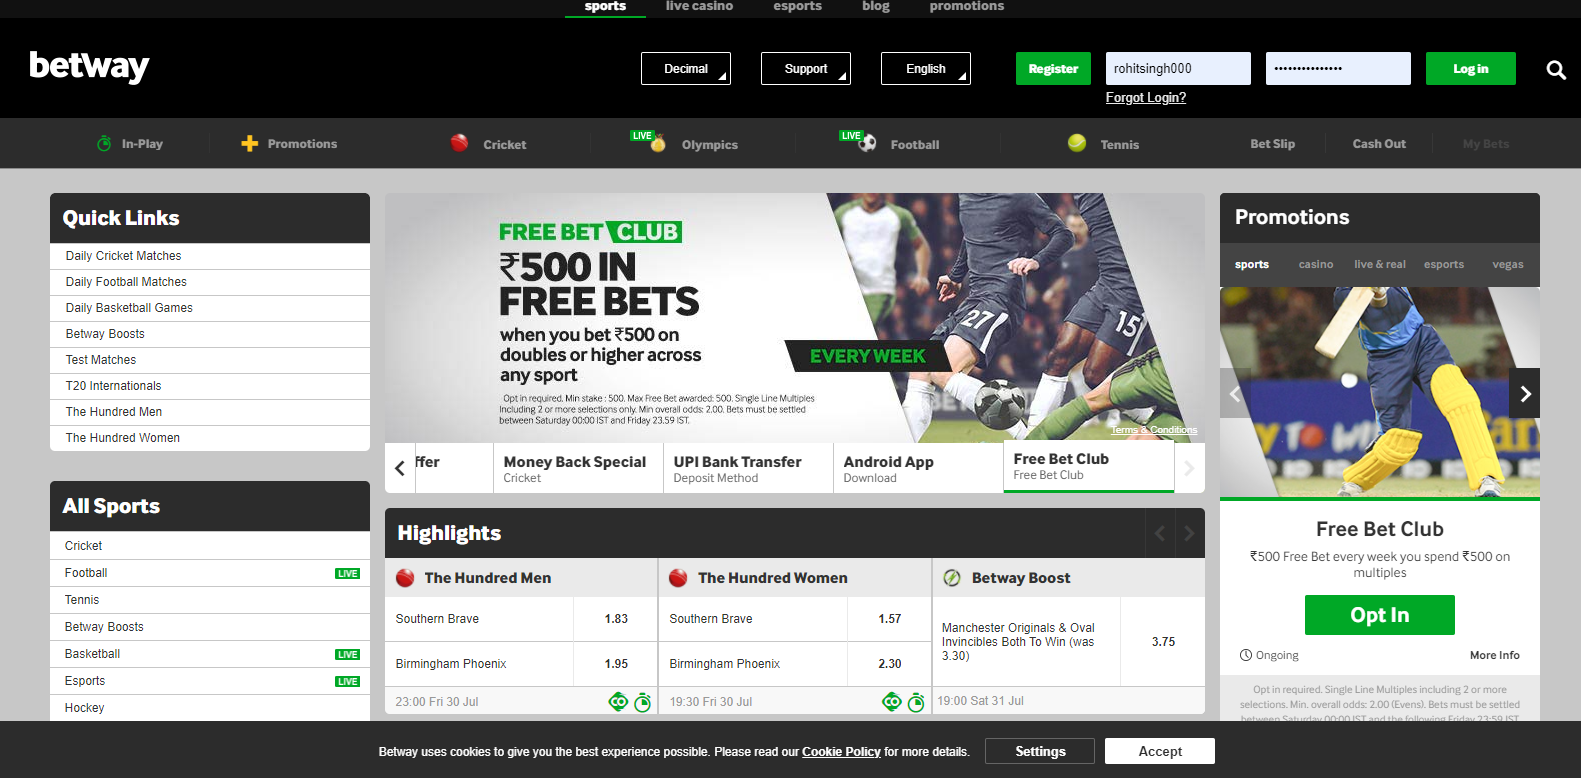 Join Betway’s Free Bet Club